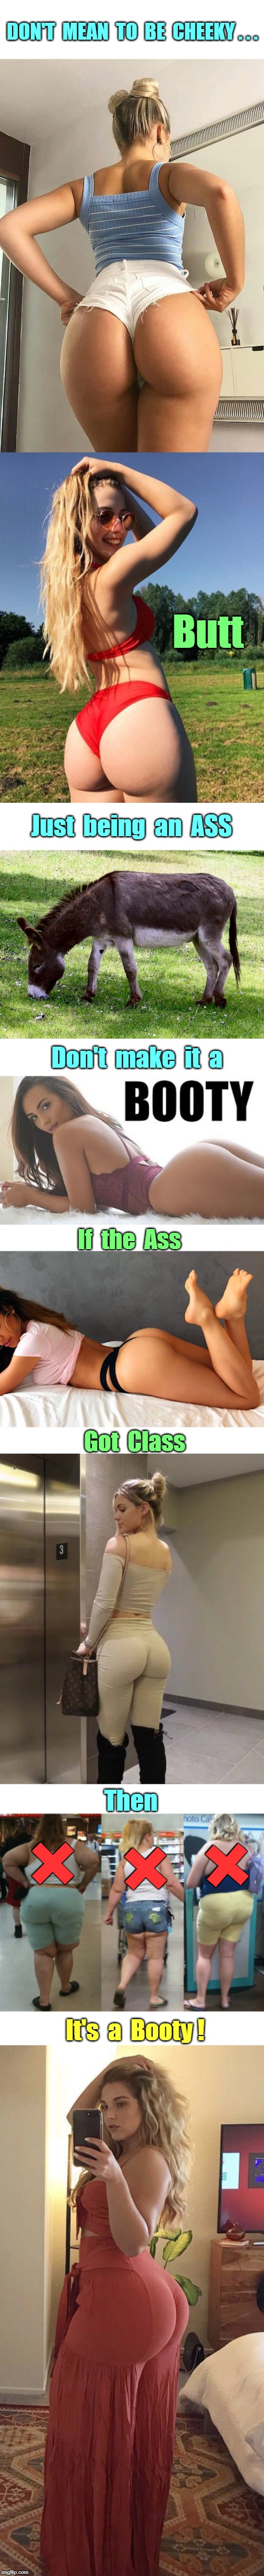 Ass Class -- and Class Ass | DON'T  MEAN  TO  BE  CHEEKY . . . Butt; Just  being  an  ASS; Don't  make  it  a; If  the  Ass; Got  Class; Then; +; +; +; It's  a  Booty ! | image tagged in funny memes,booty,rick75230 | made w/ Imgflip meme maker